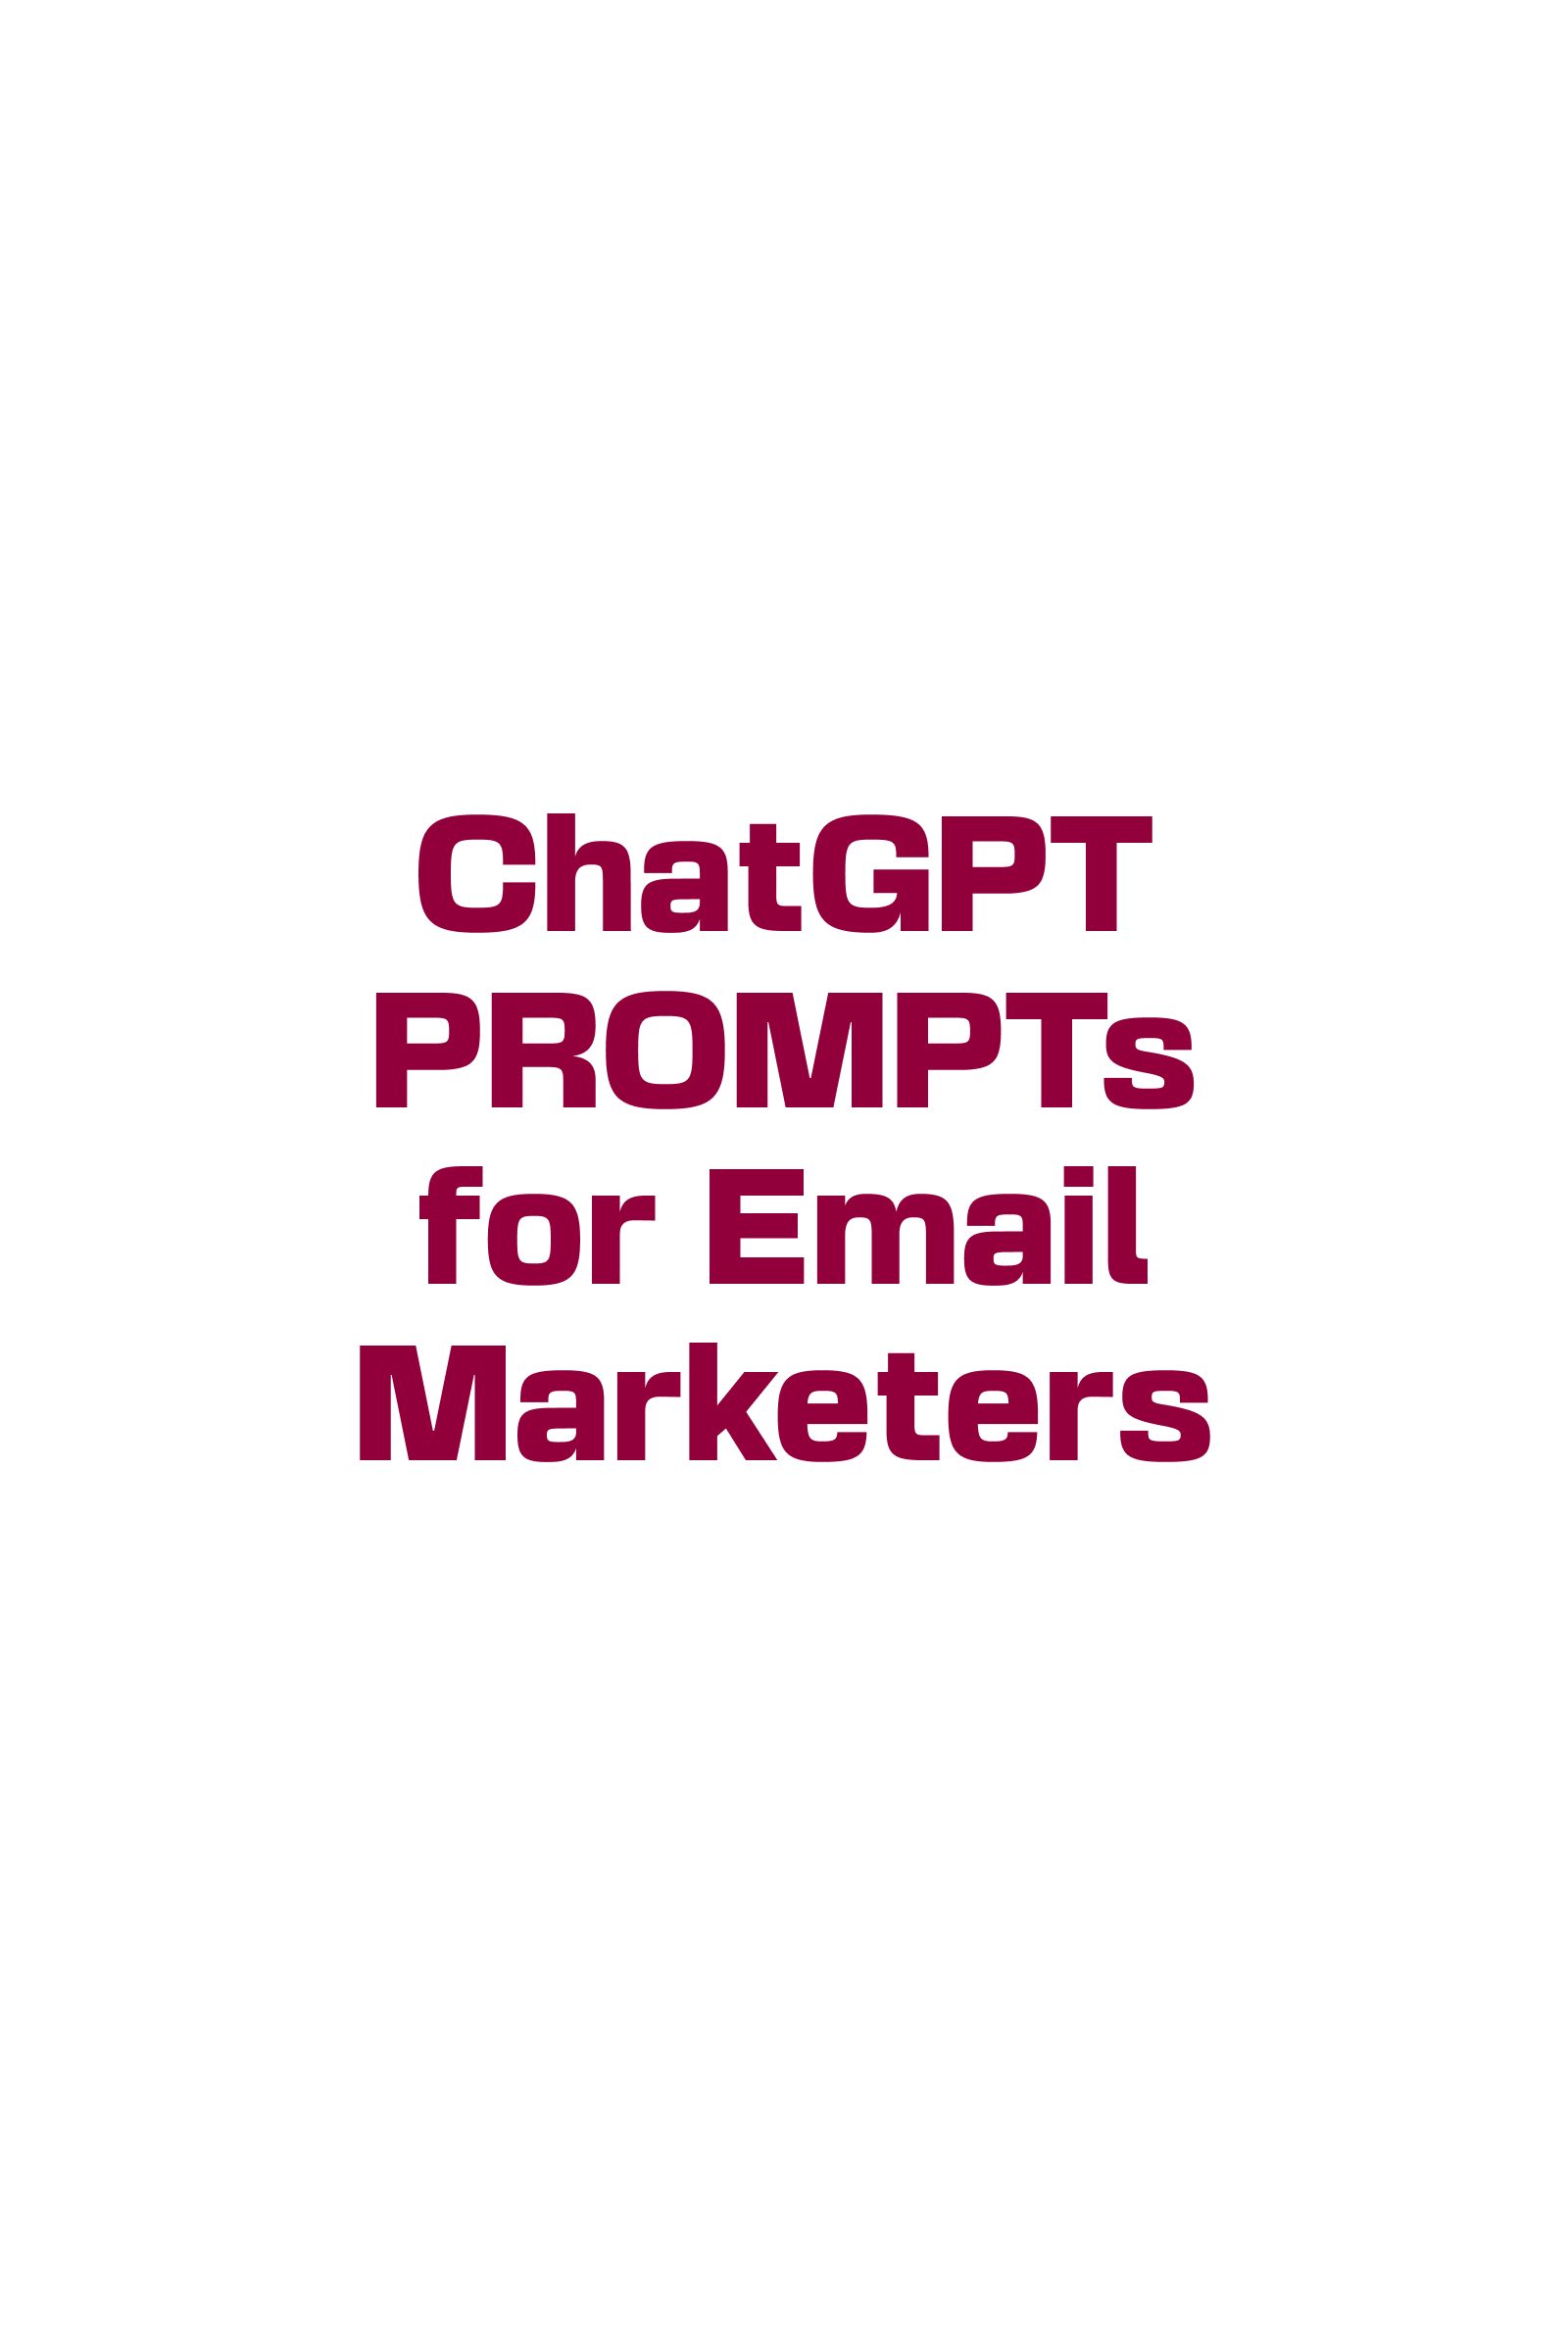 ChatGPT PROMPTs for Email Marketers